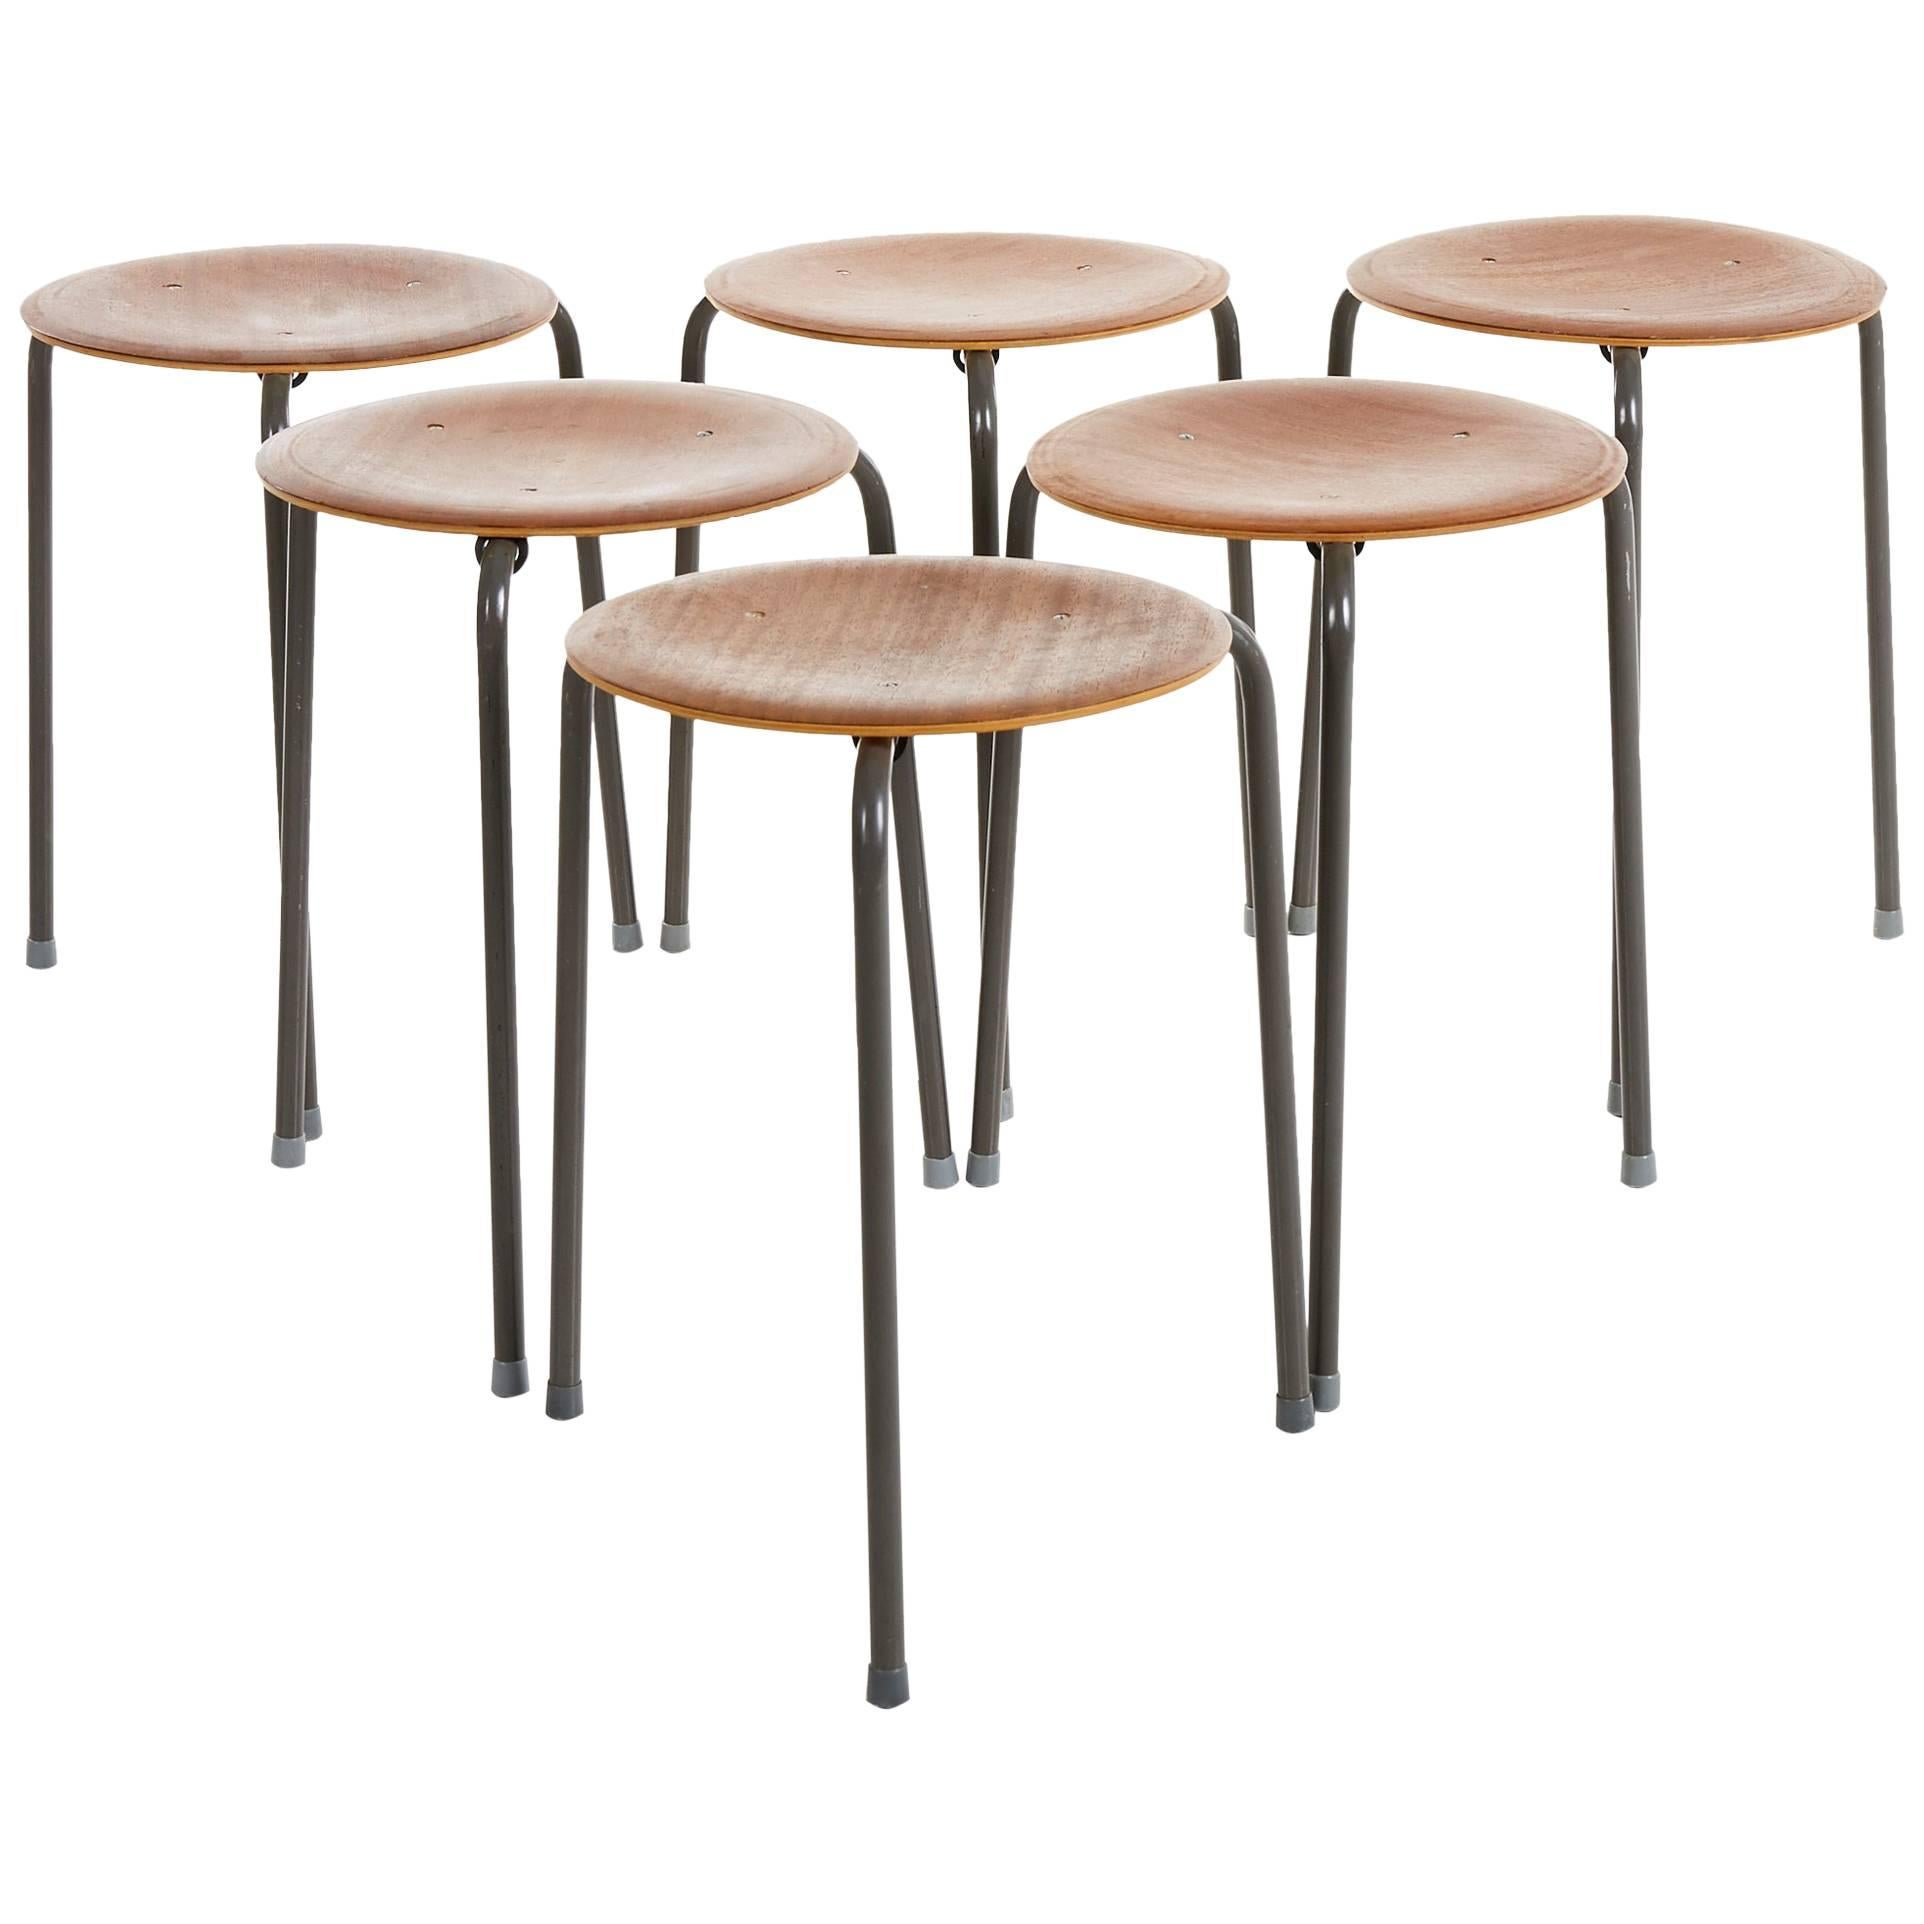 Swedish Modern, Architects Stools, Mahogany, 1950s attributed to Arne Jacobsen For Sale